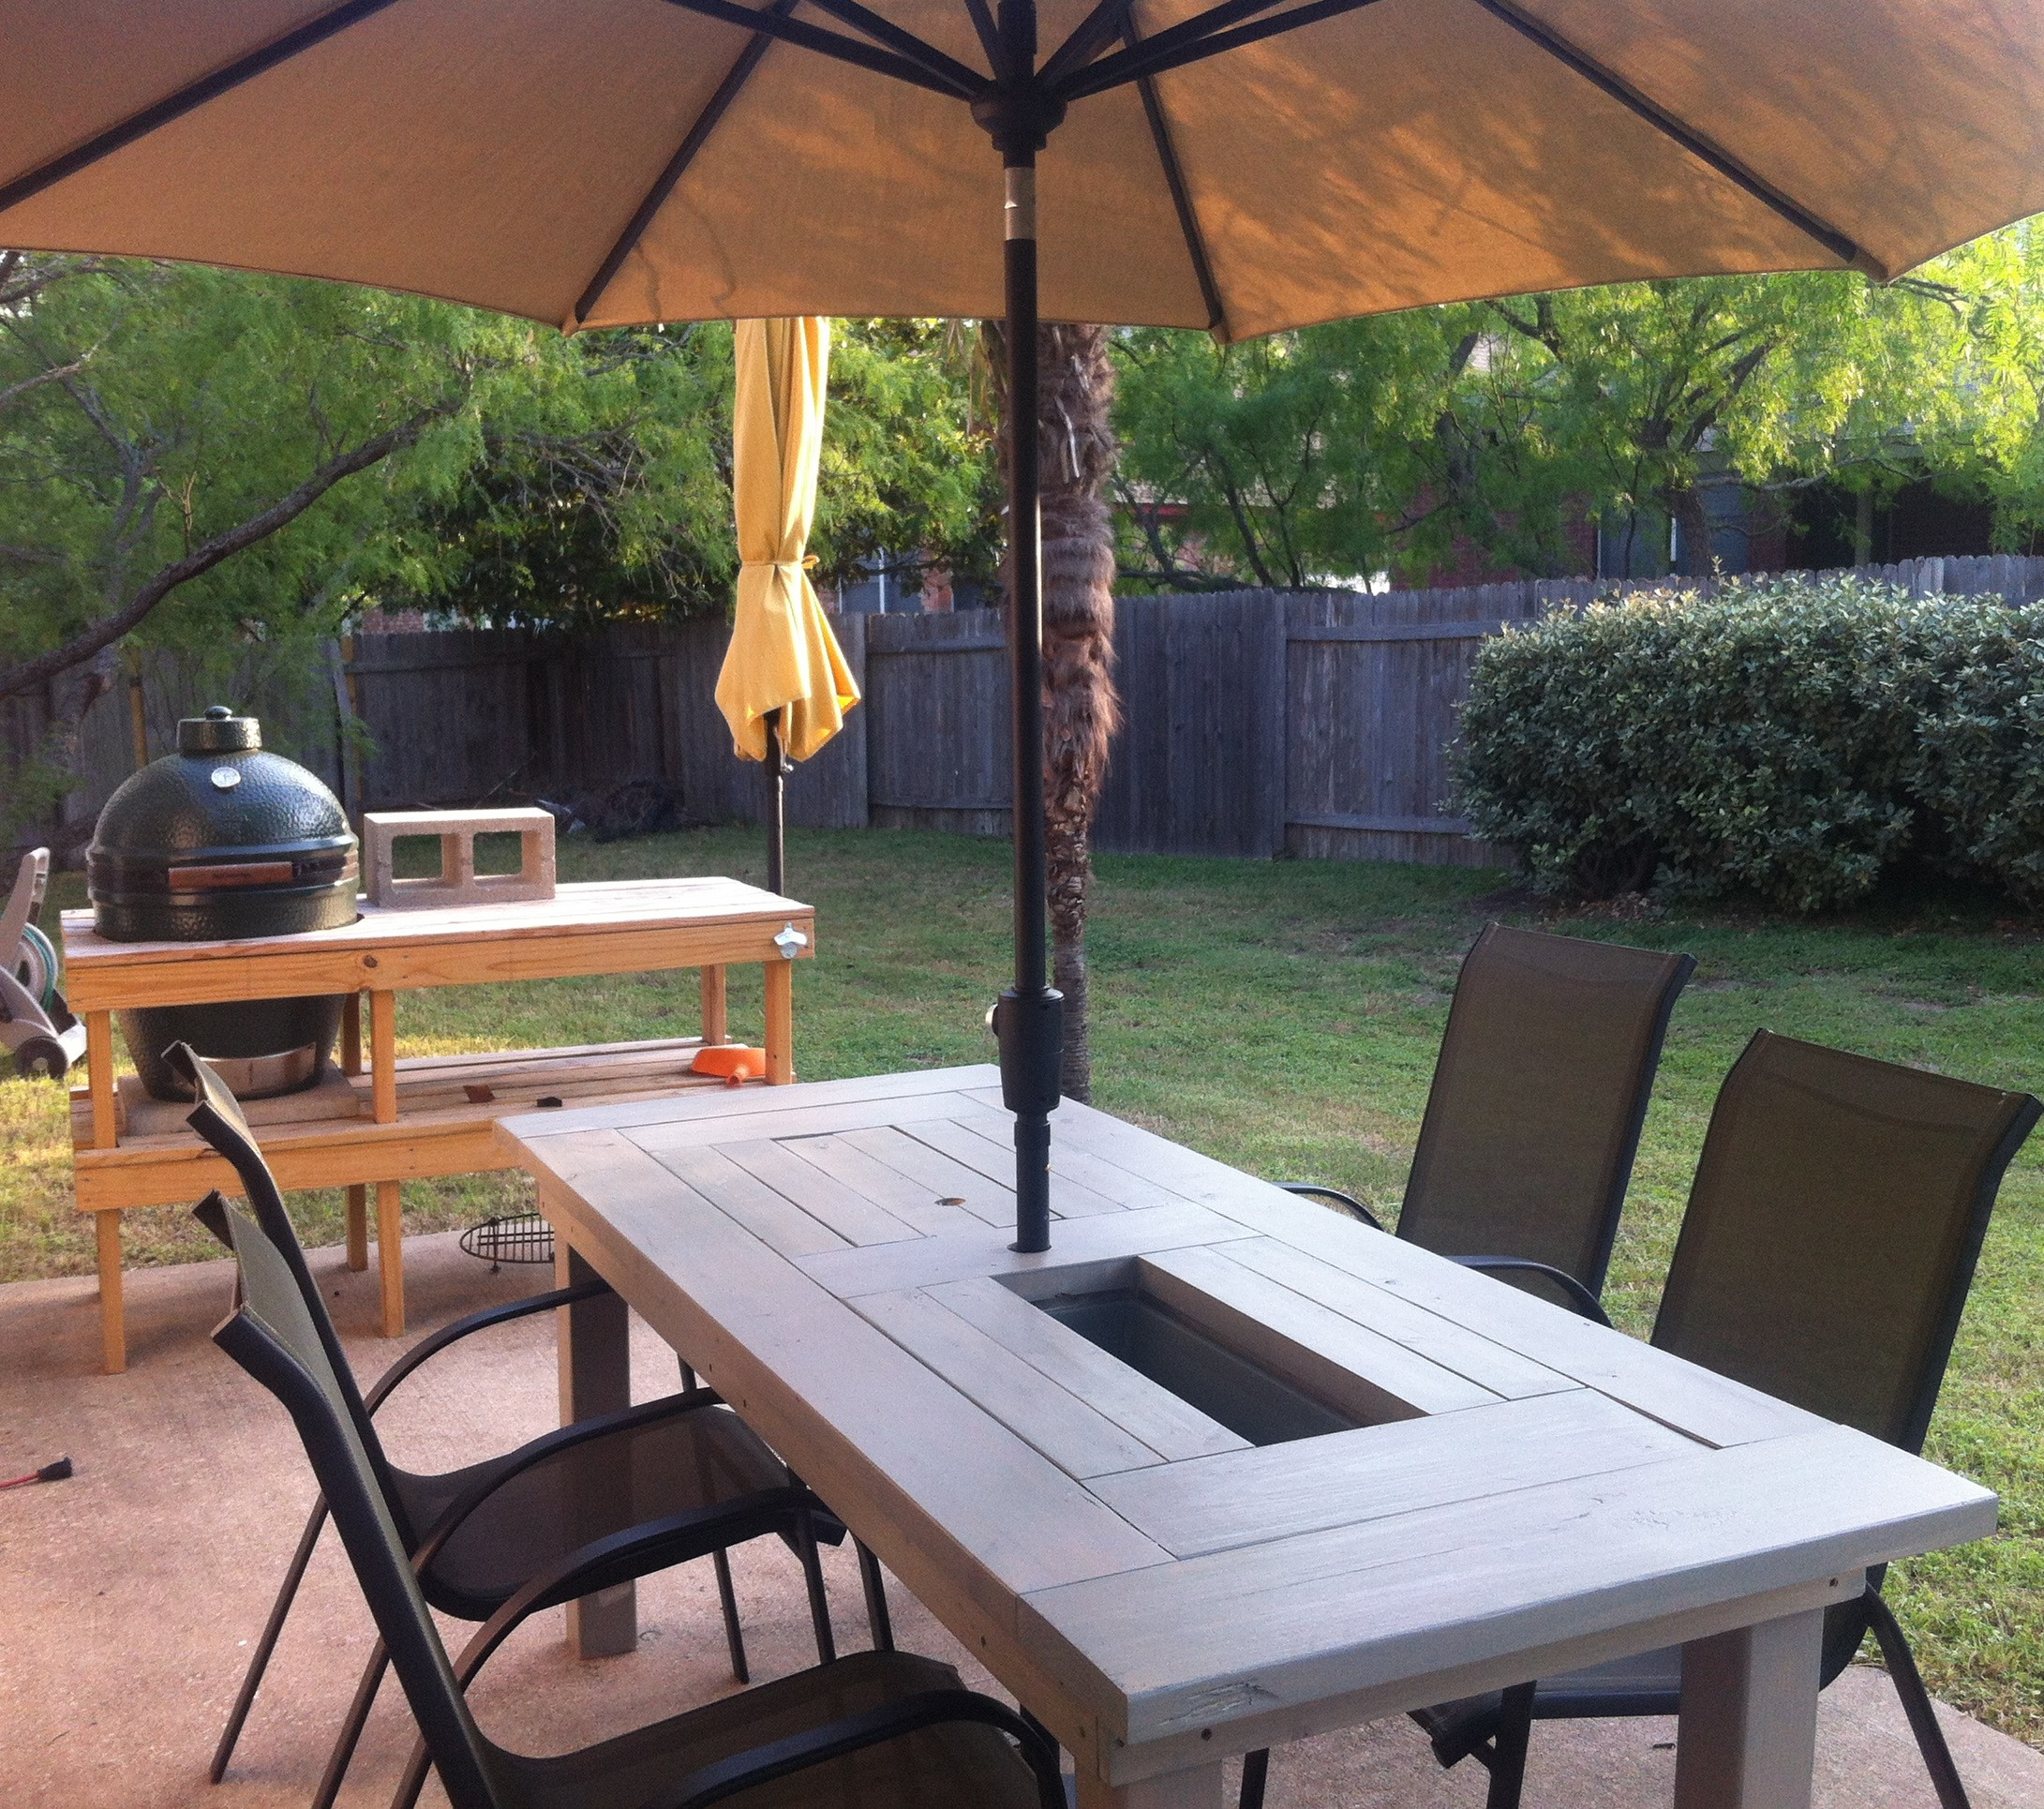 Backyard Table Ideas
 Patio Table with Built in Beer Wine Coolers